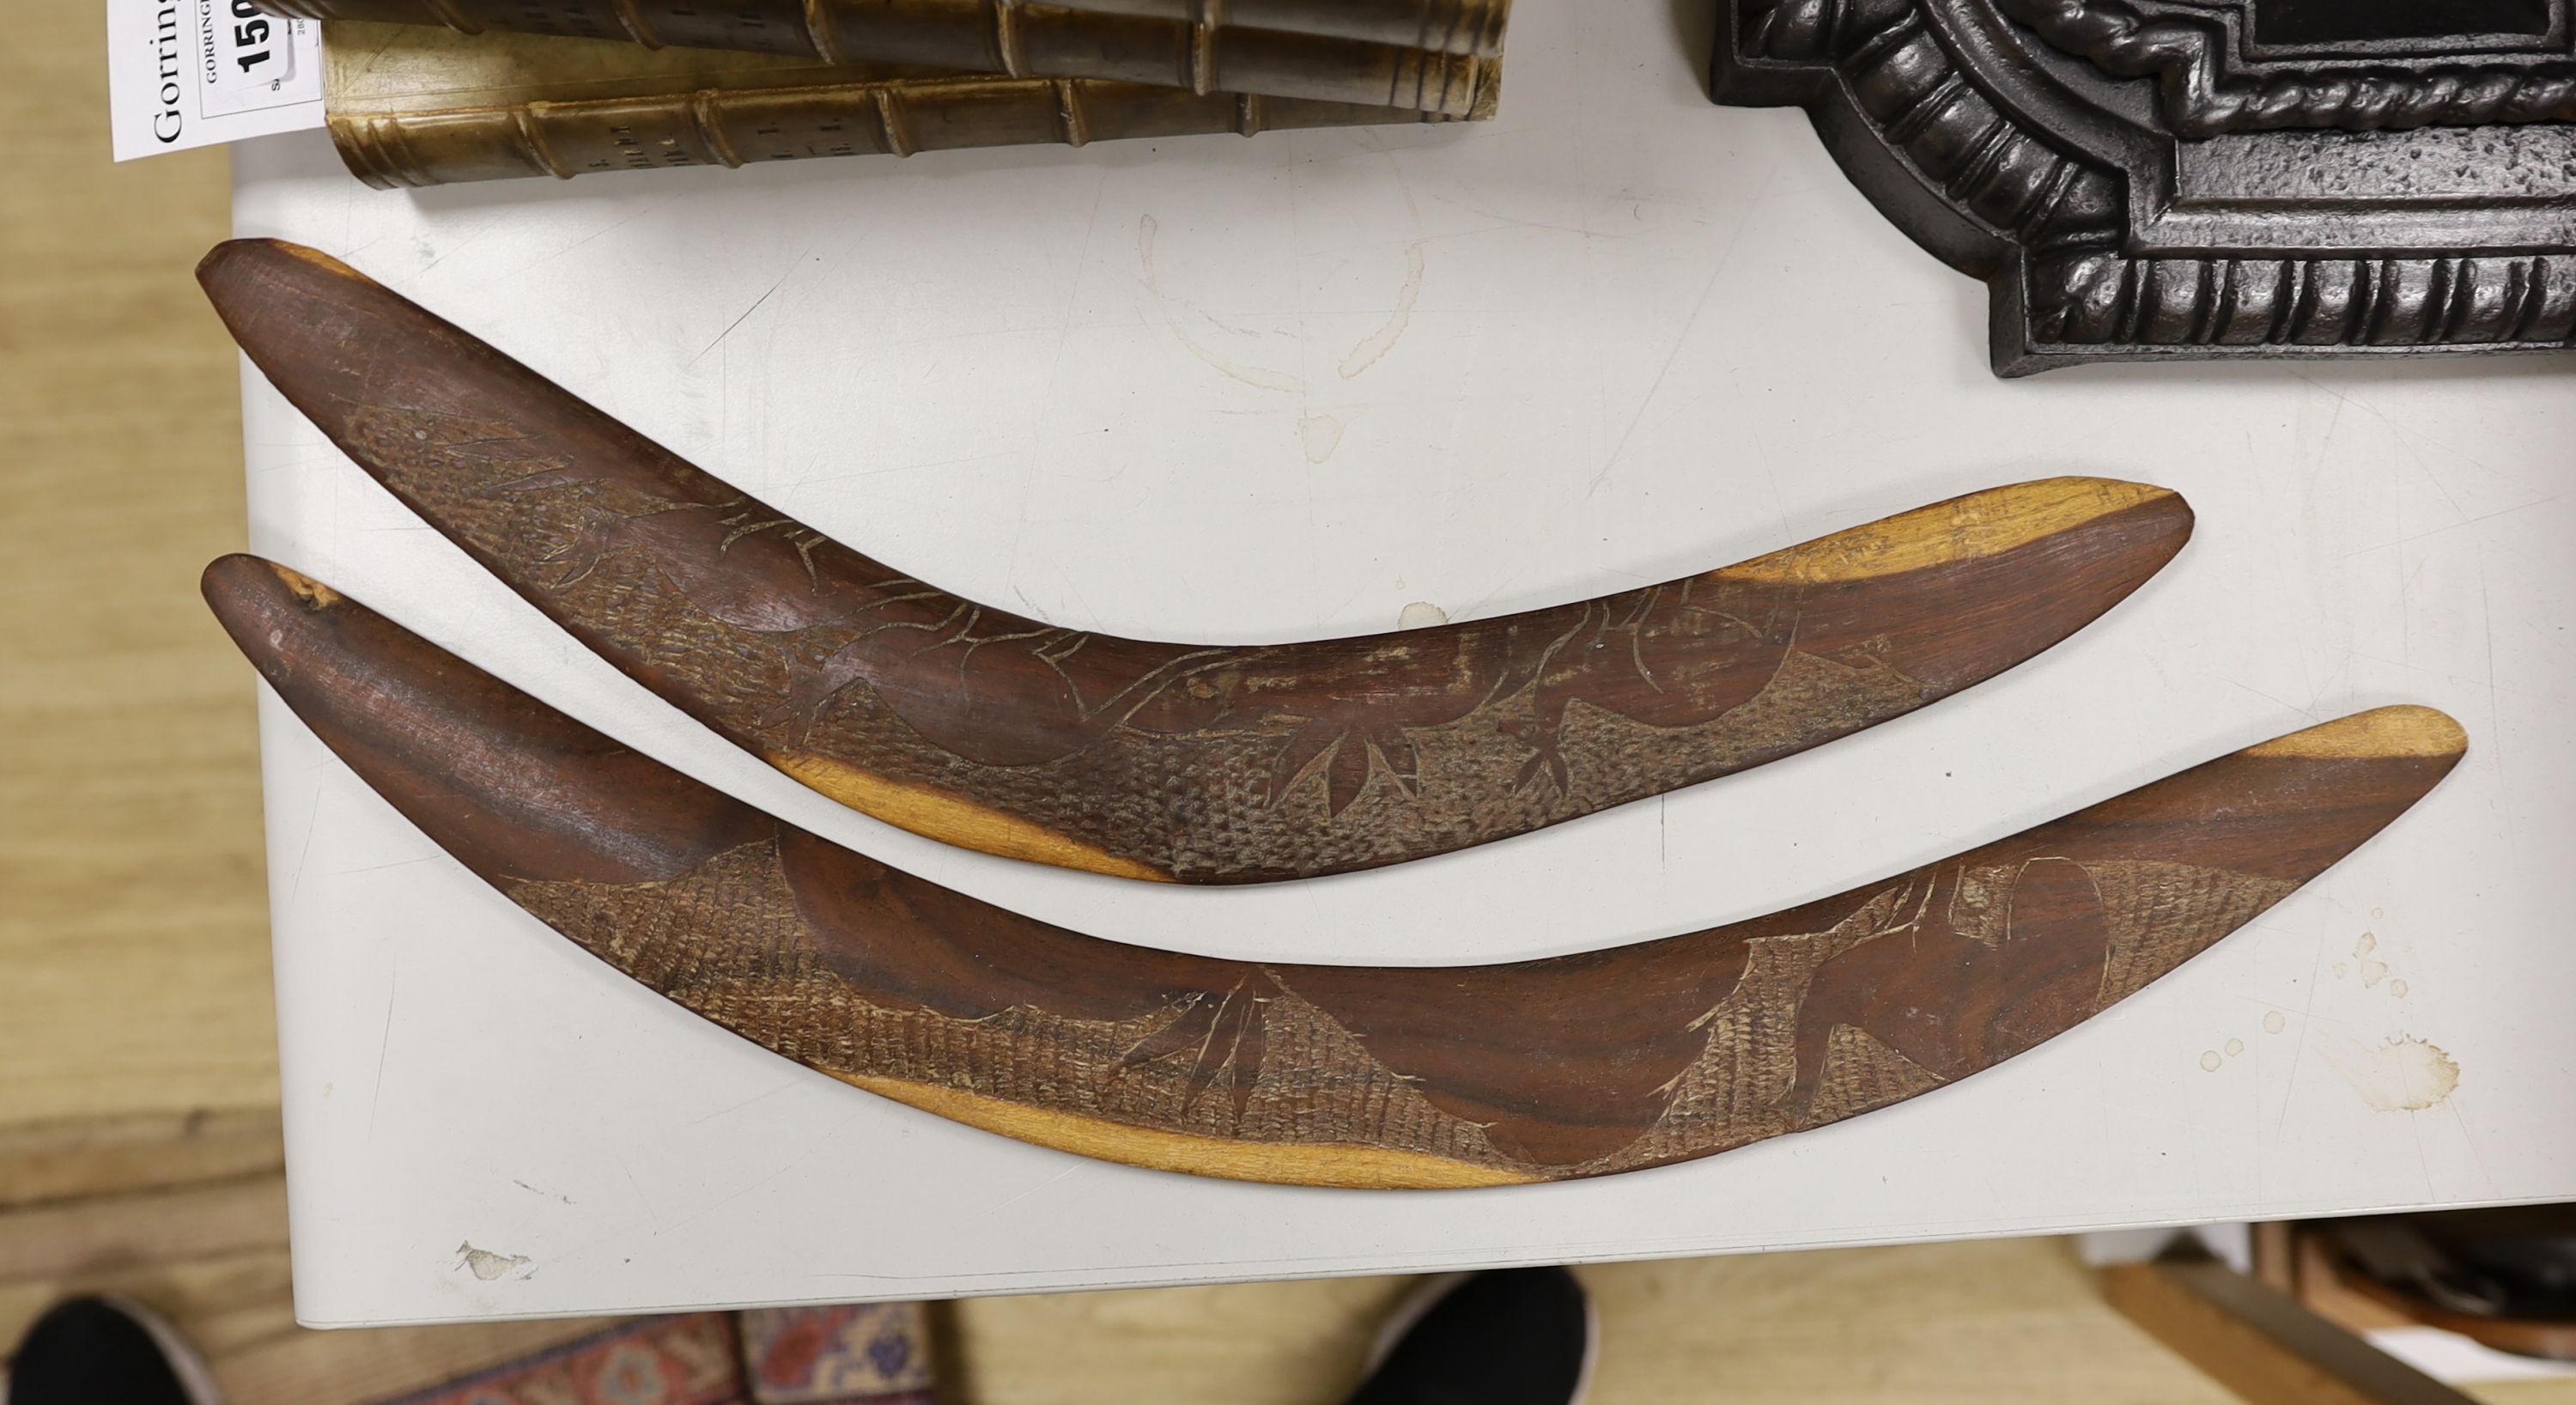 A 20th century Australian aboriginal spear and holder and 2 boomerangs., Spear 142 cms long.